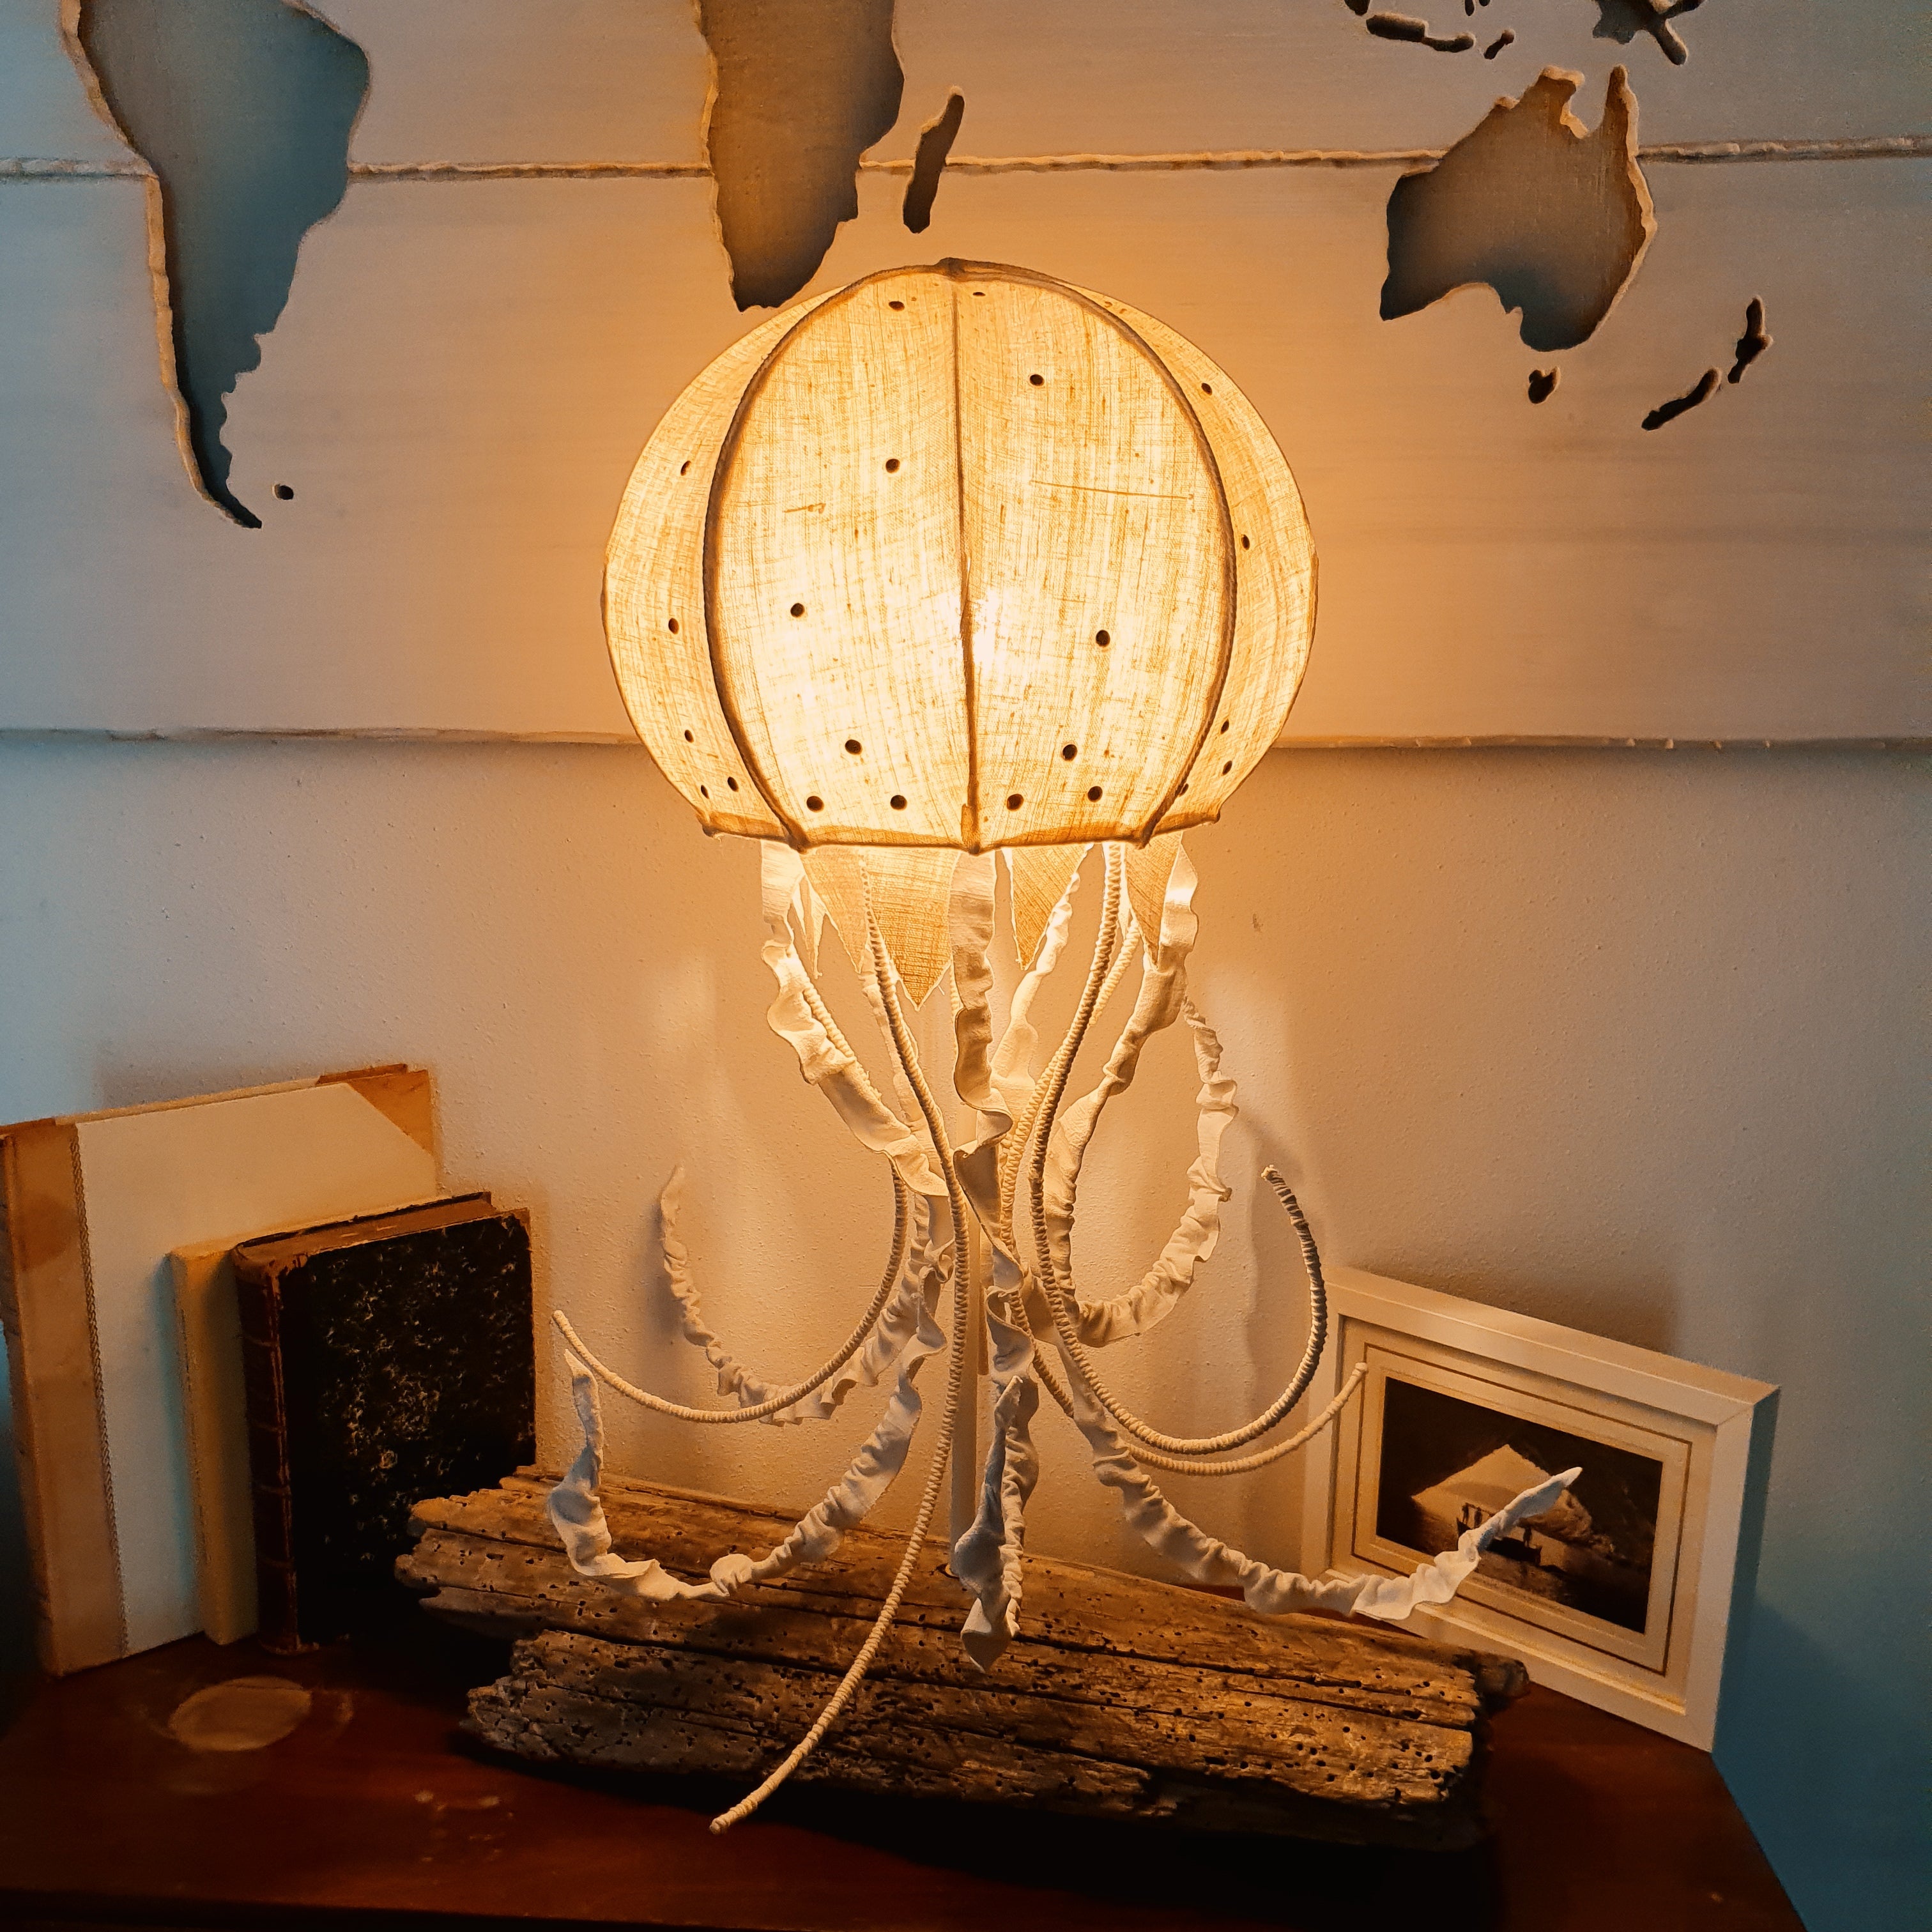 Big Jellyfish Lamp with Wooden Support